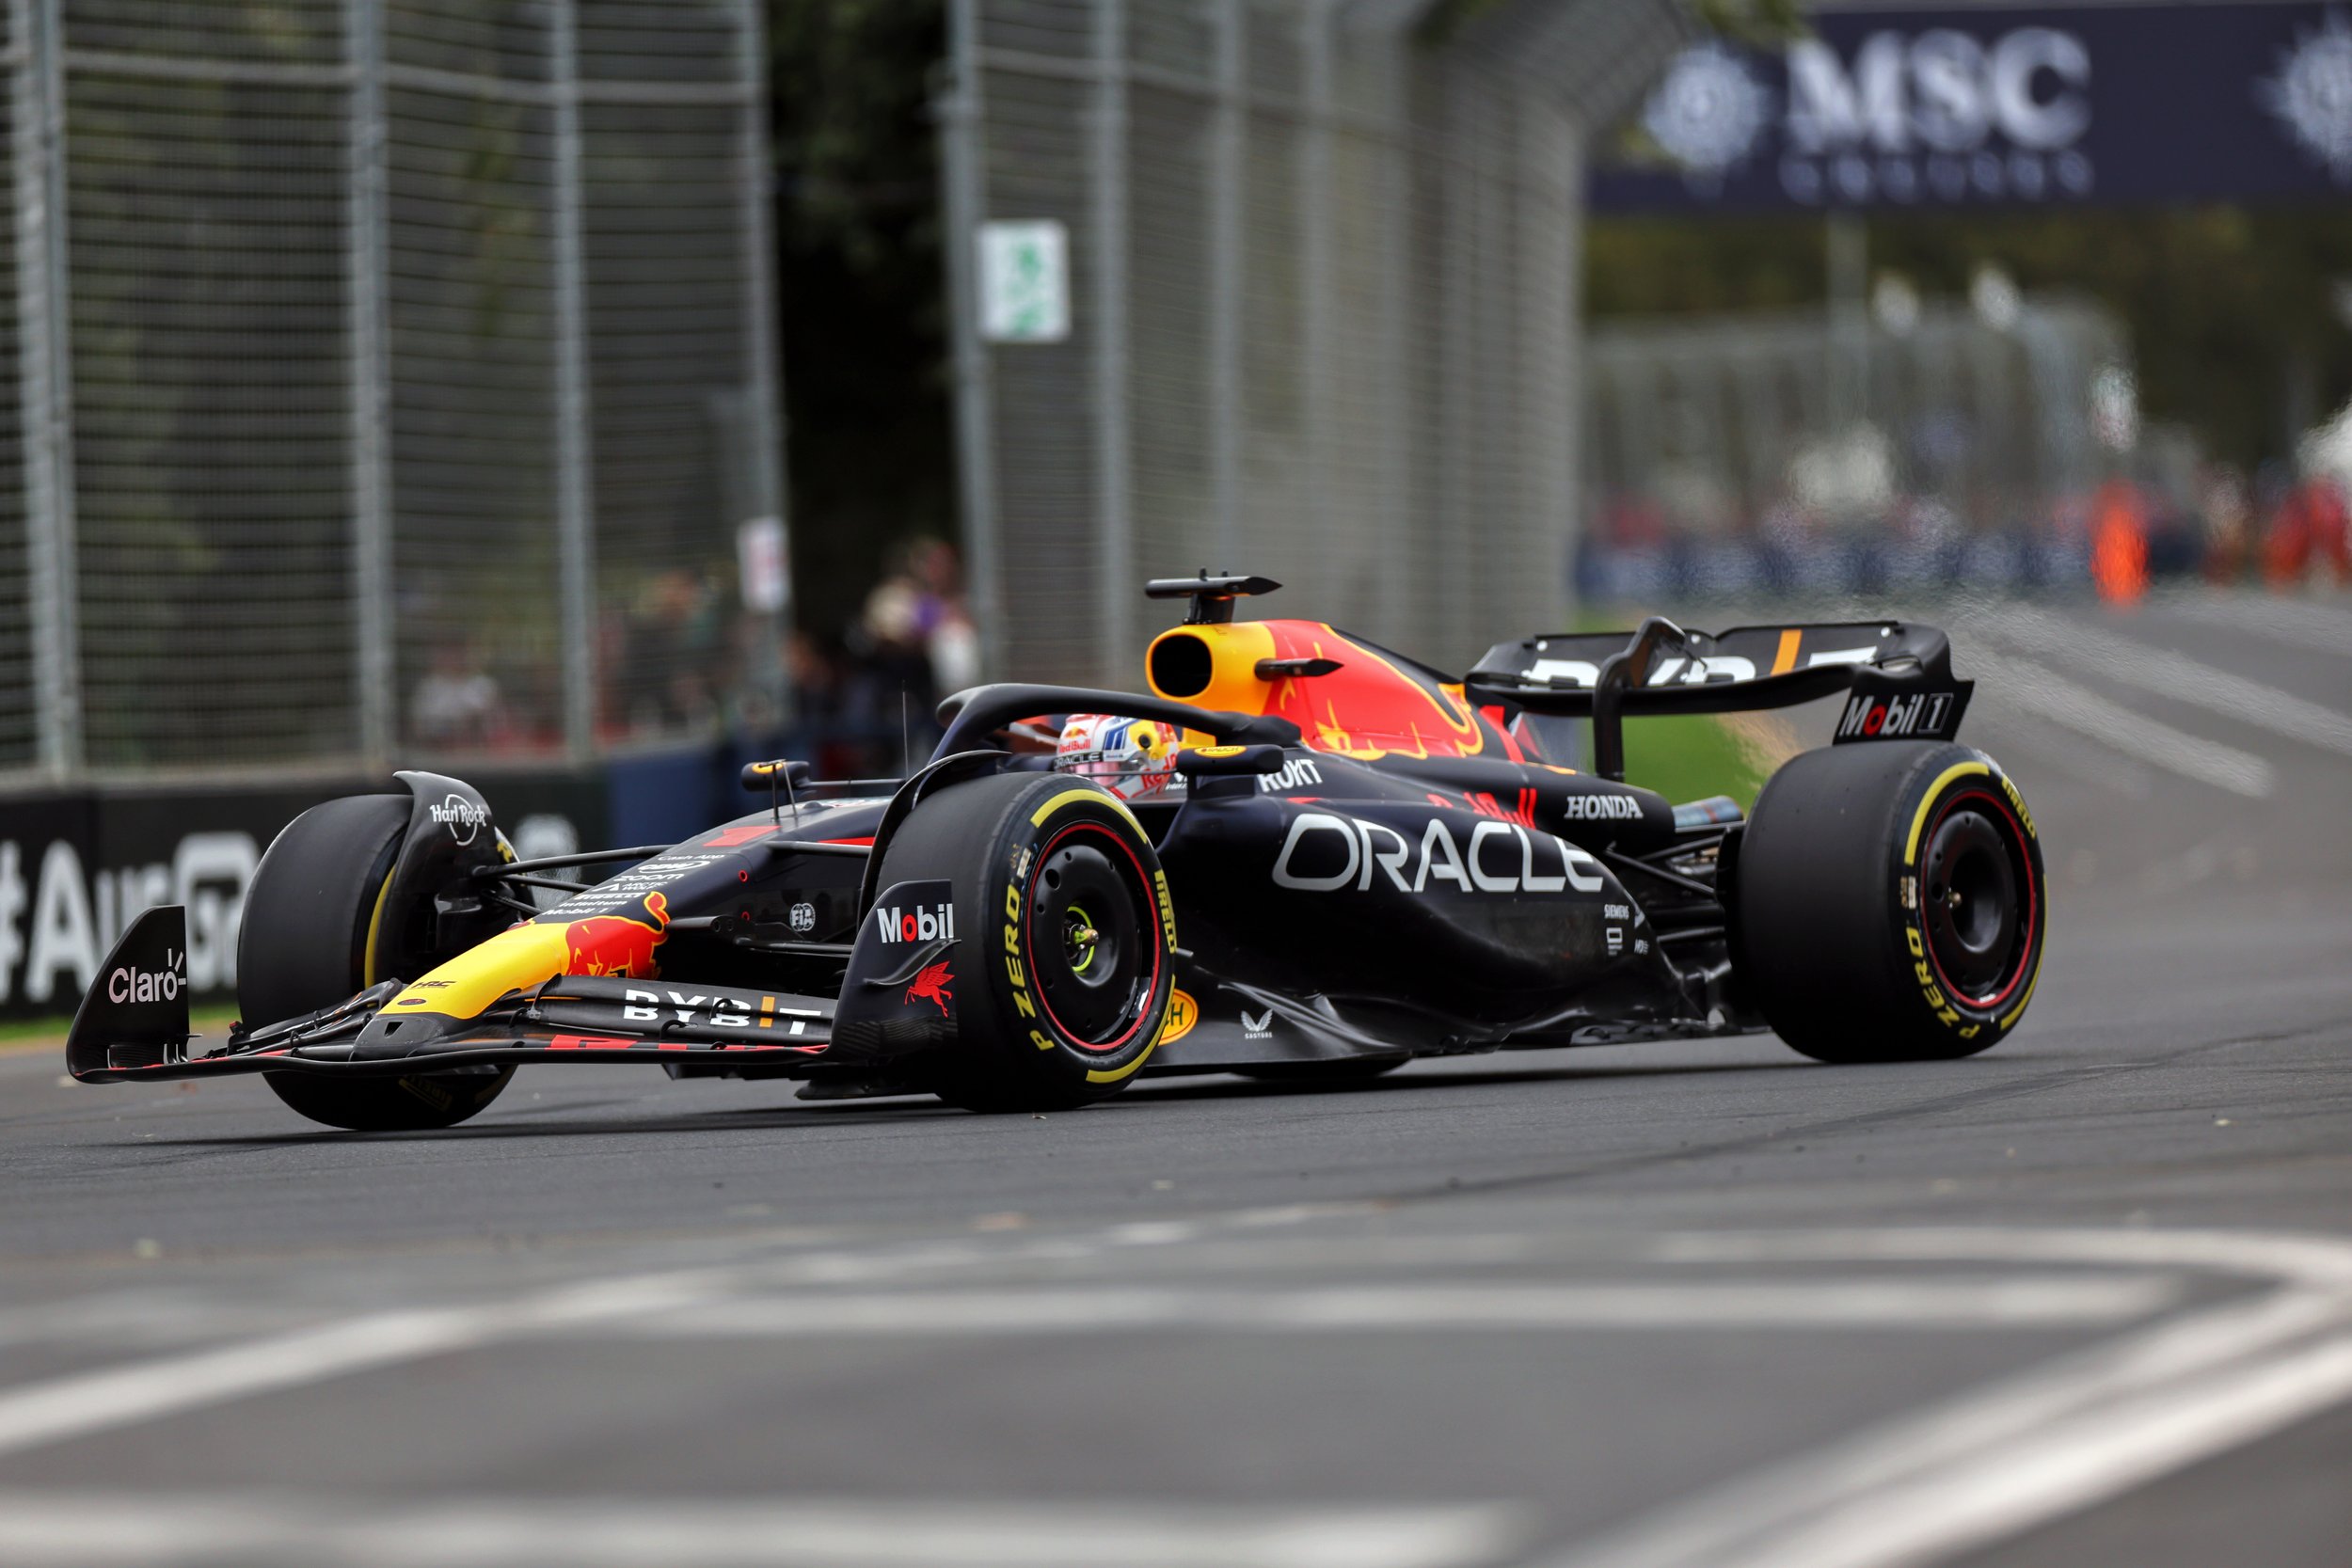 Max Verstappen tops Friday practice in Melbourne ahead of Fernando Alonso